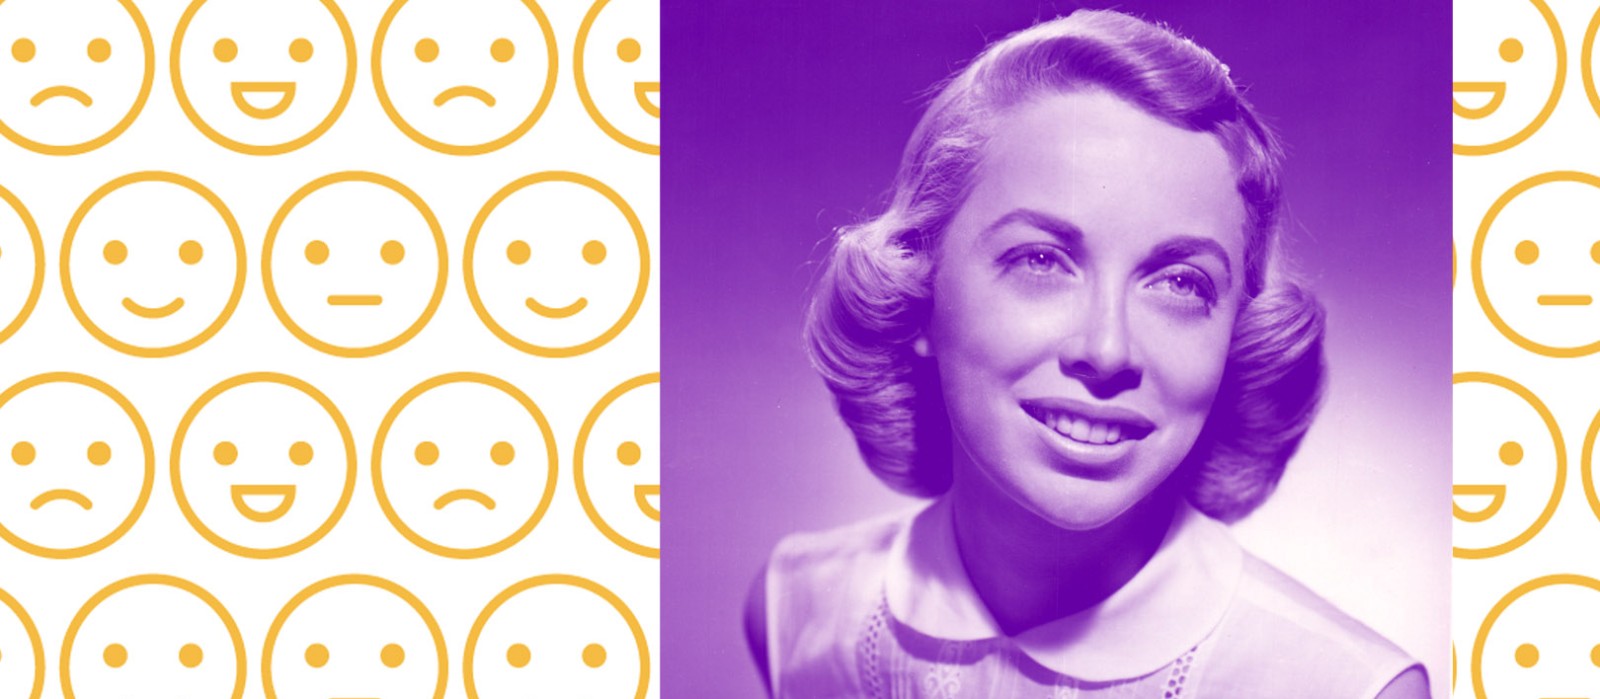 purple-tinted photo of a woman in the 1950s on top of an illustration of different yellow faces displaying various emotions